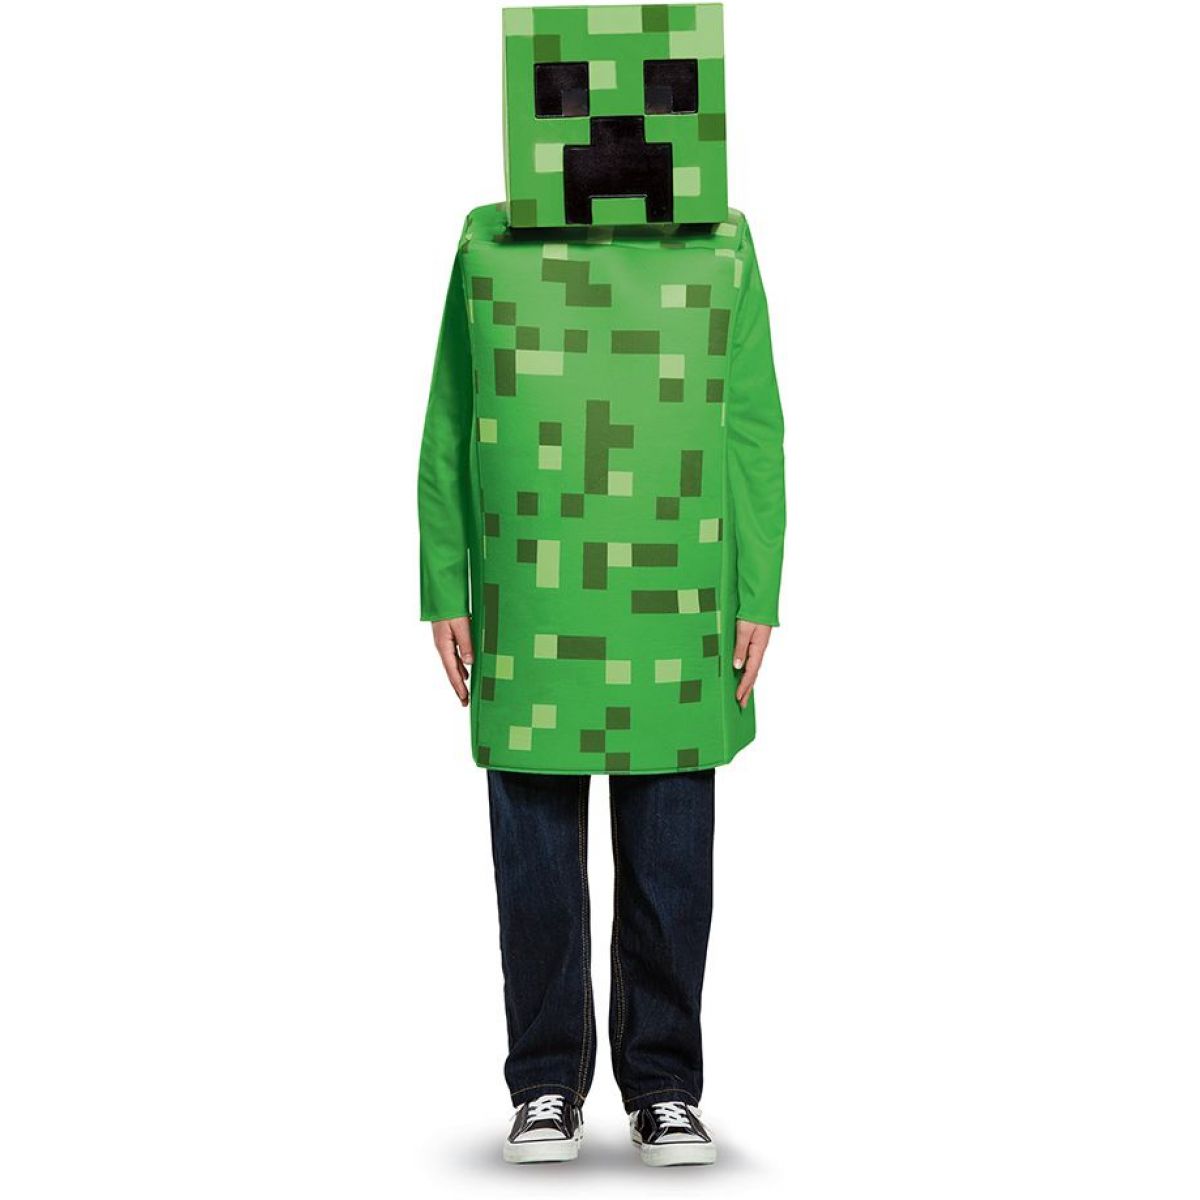 Epee Minecraft Creeper kostým 7 - 8 let